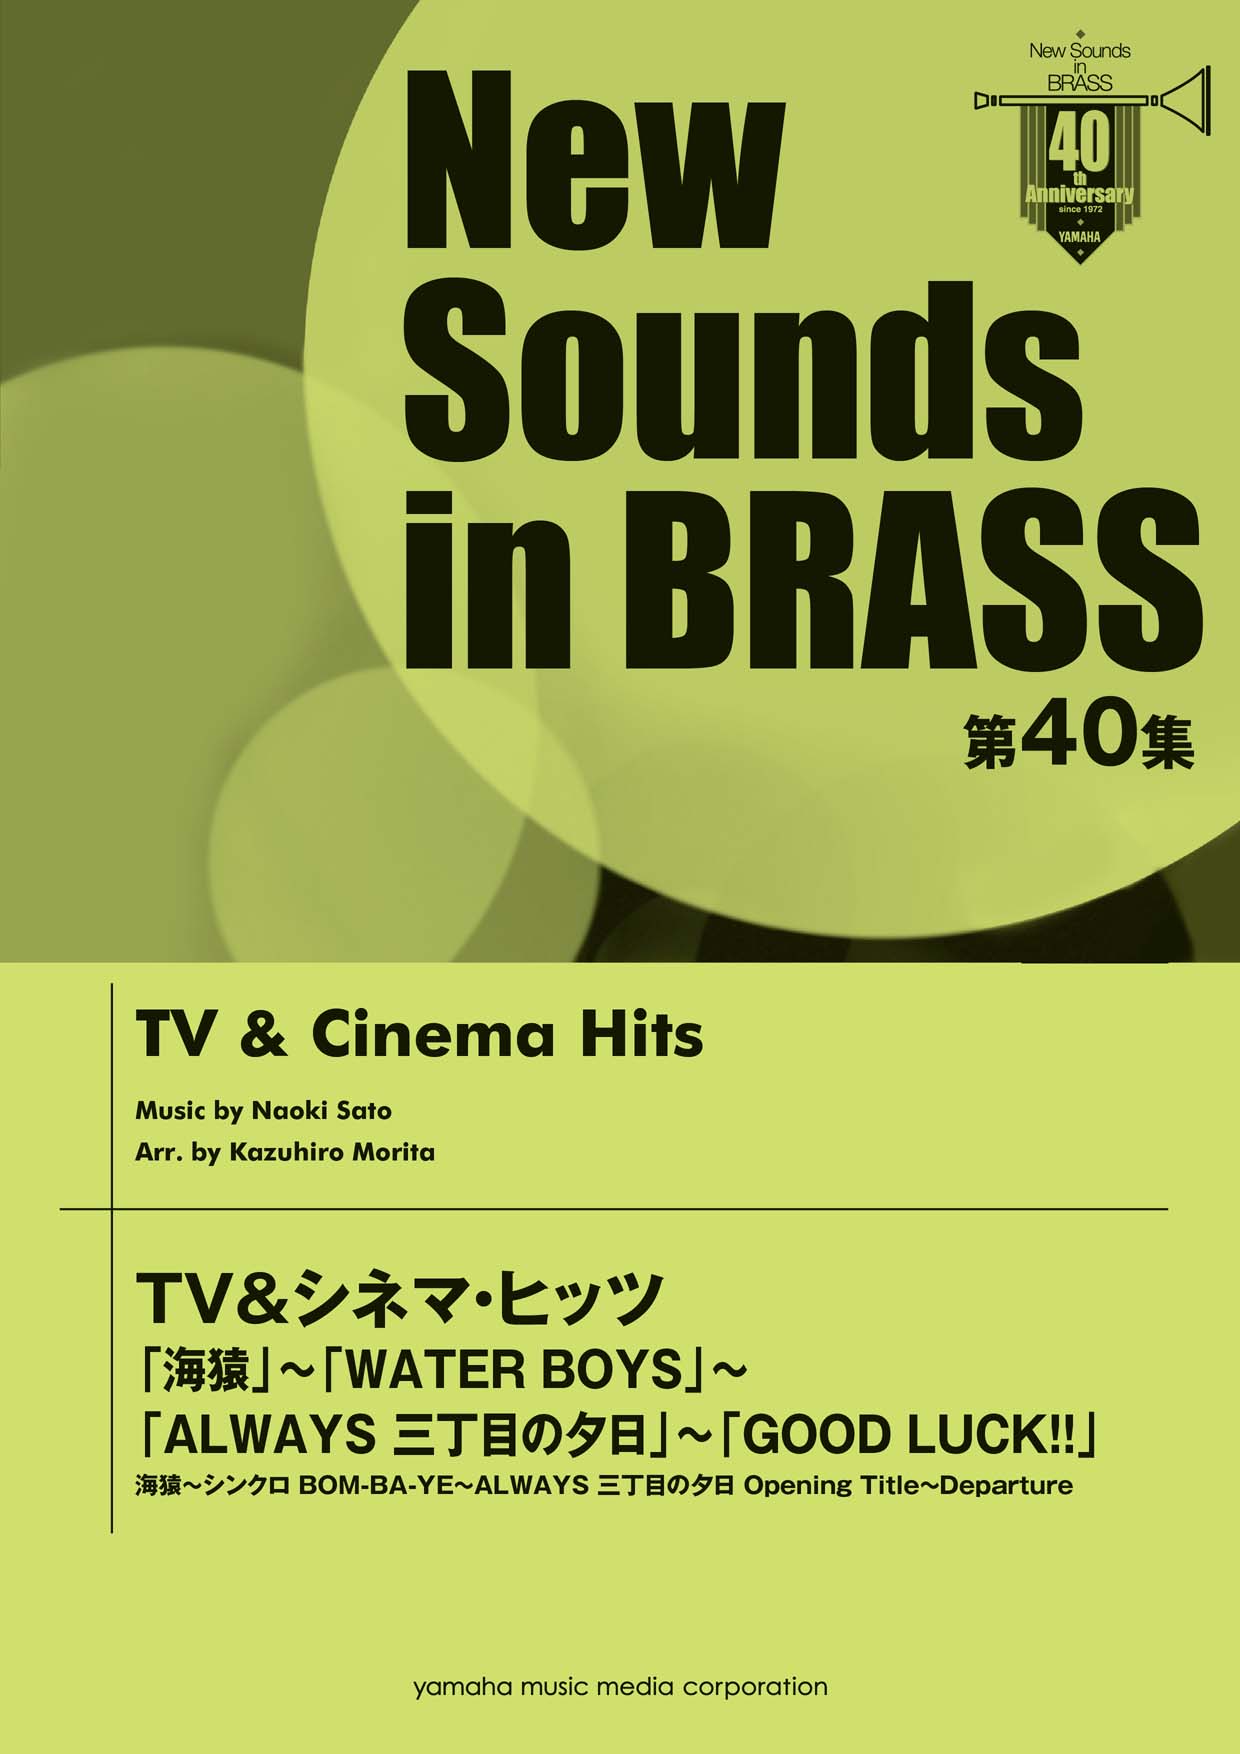 New Sounds in BRASS 第40集 TV&シネマ・ヒッツ 海猿～WATER BOYS 